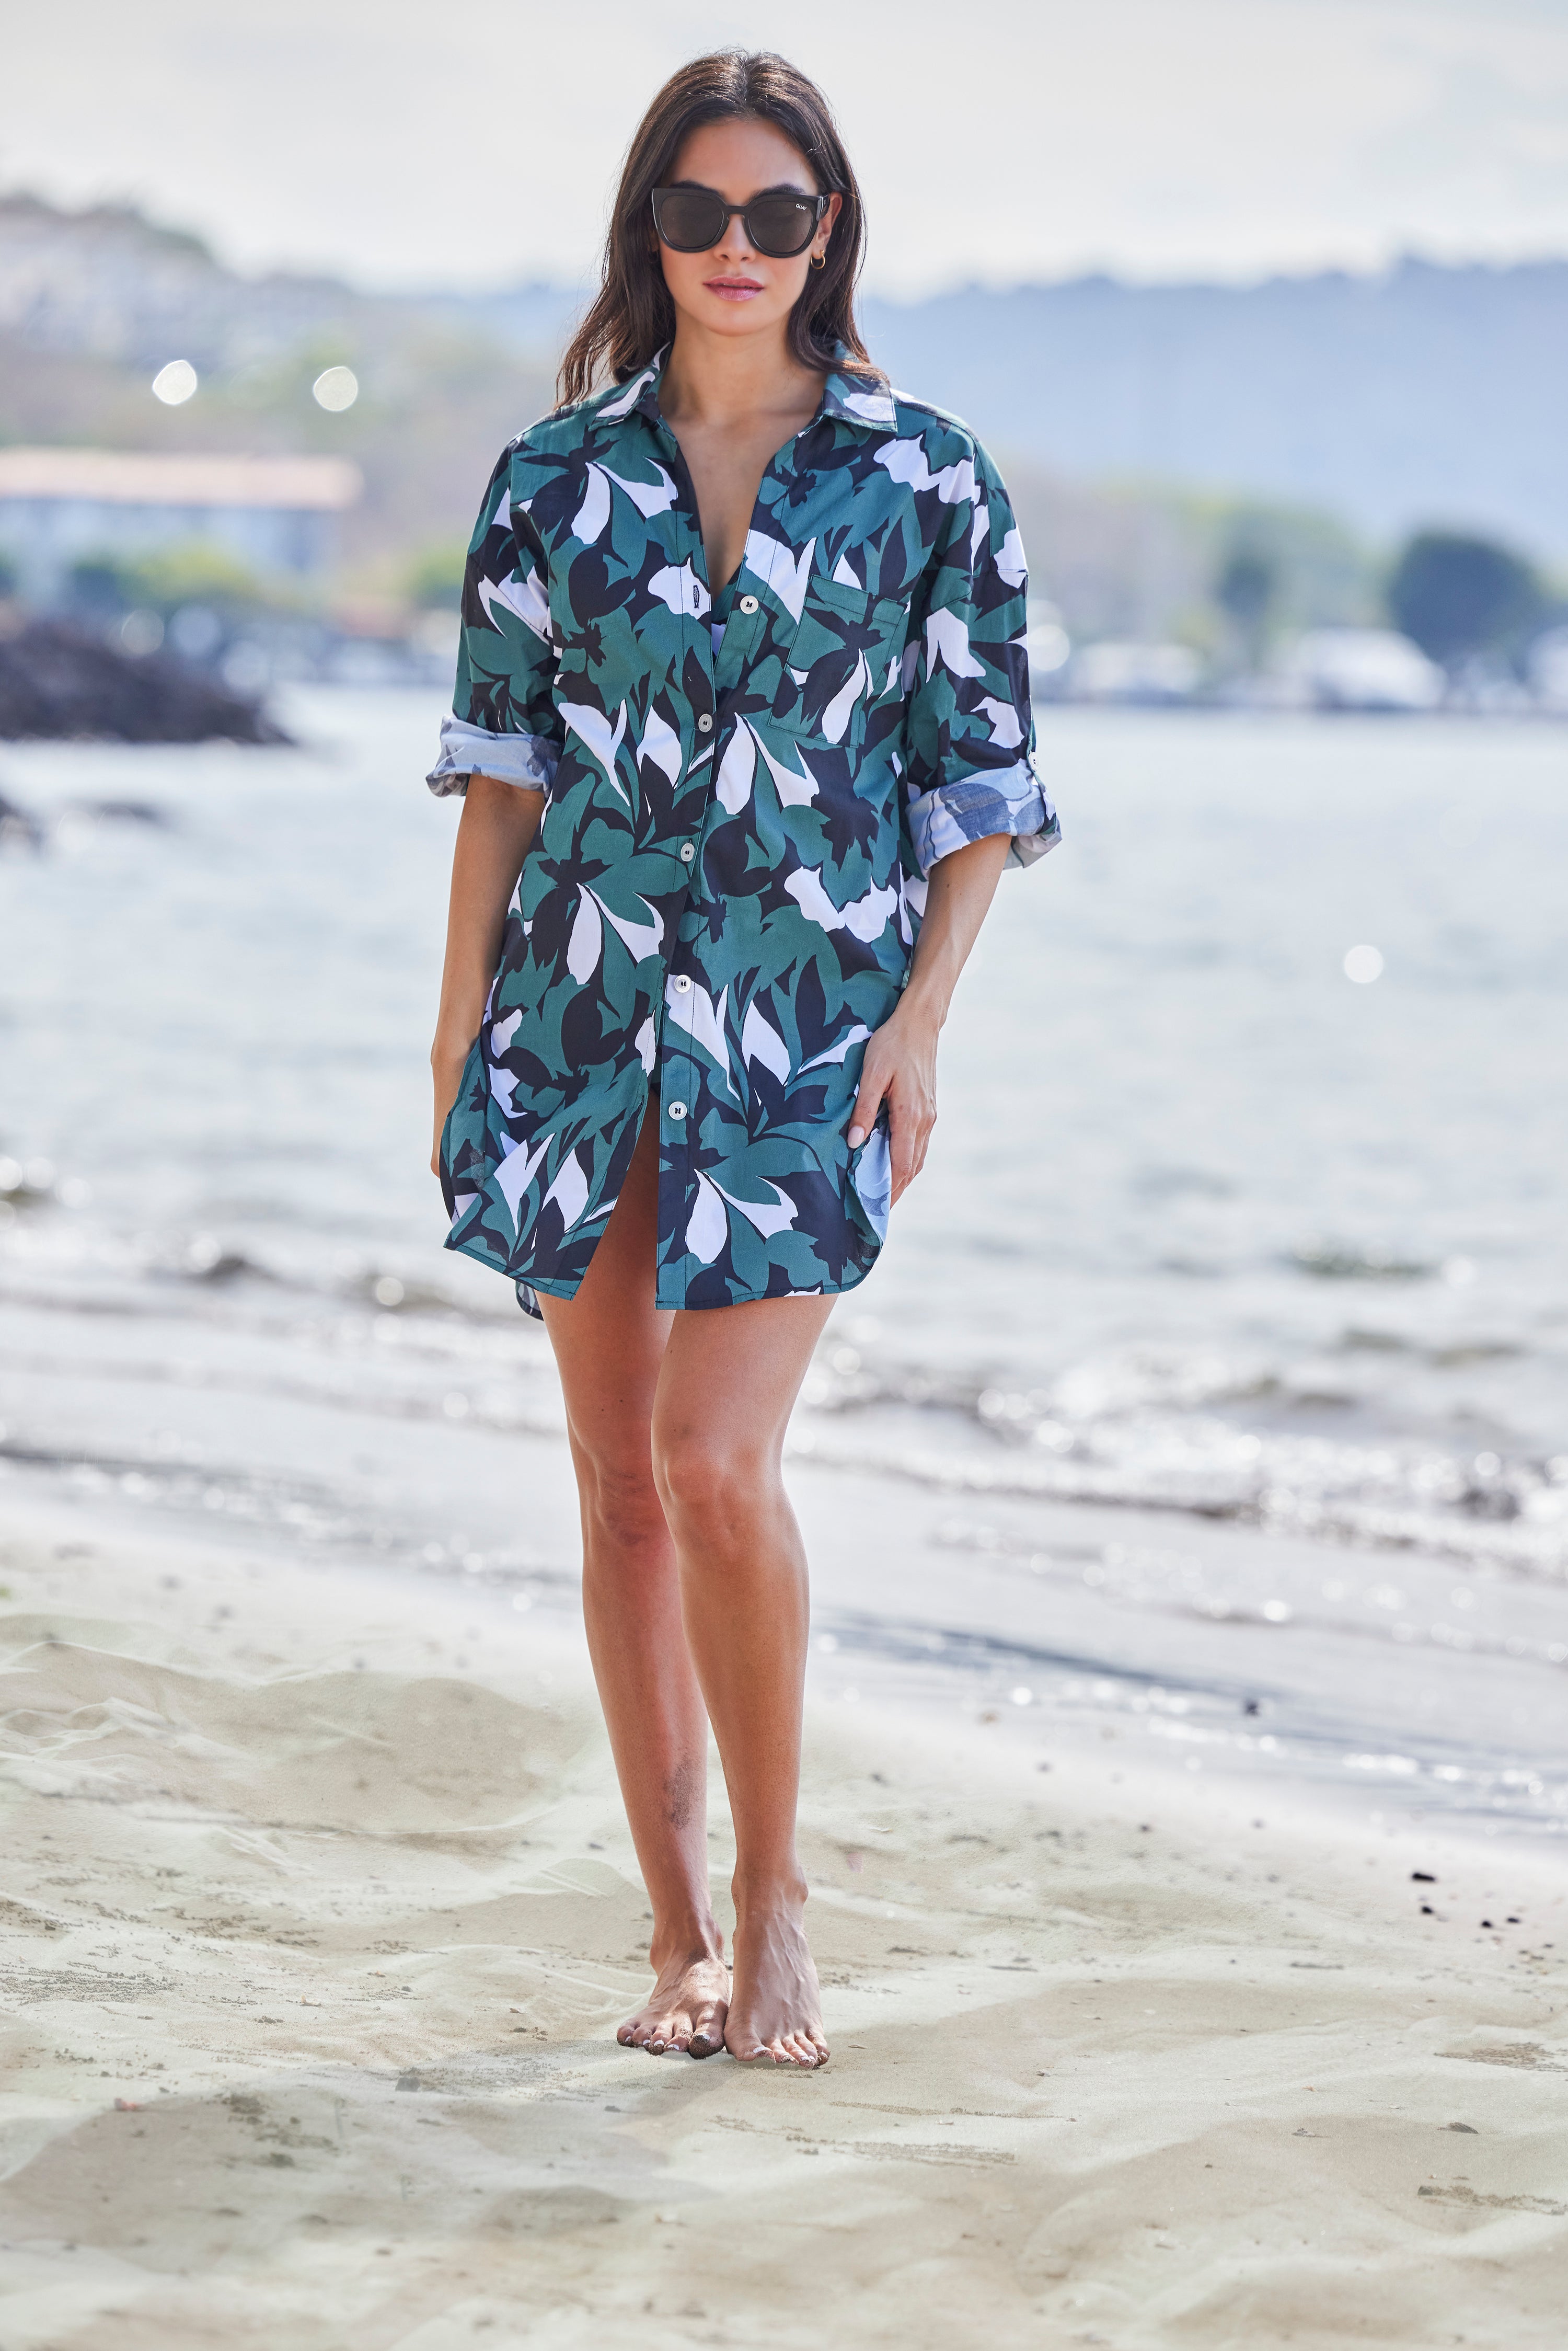 Women's Beach Cover Ups: Bathing Suit and Swimsuit Cover Ups